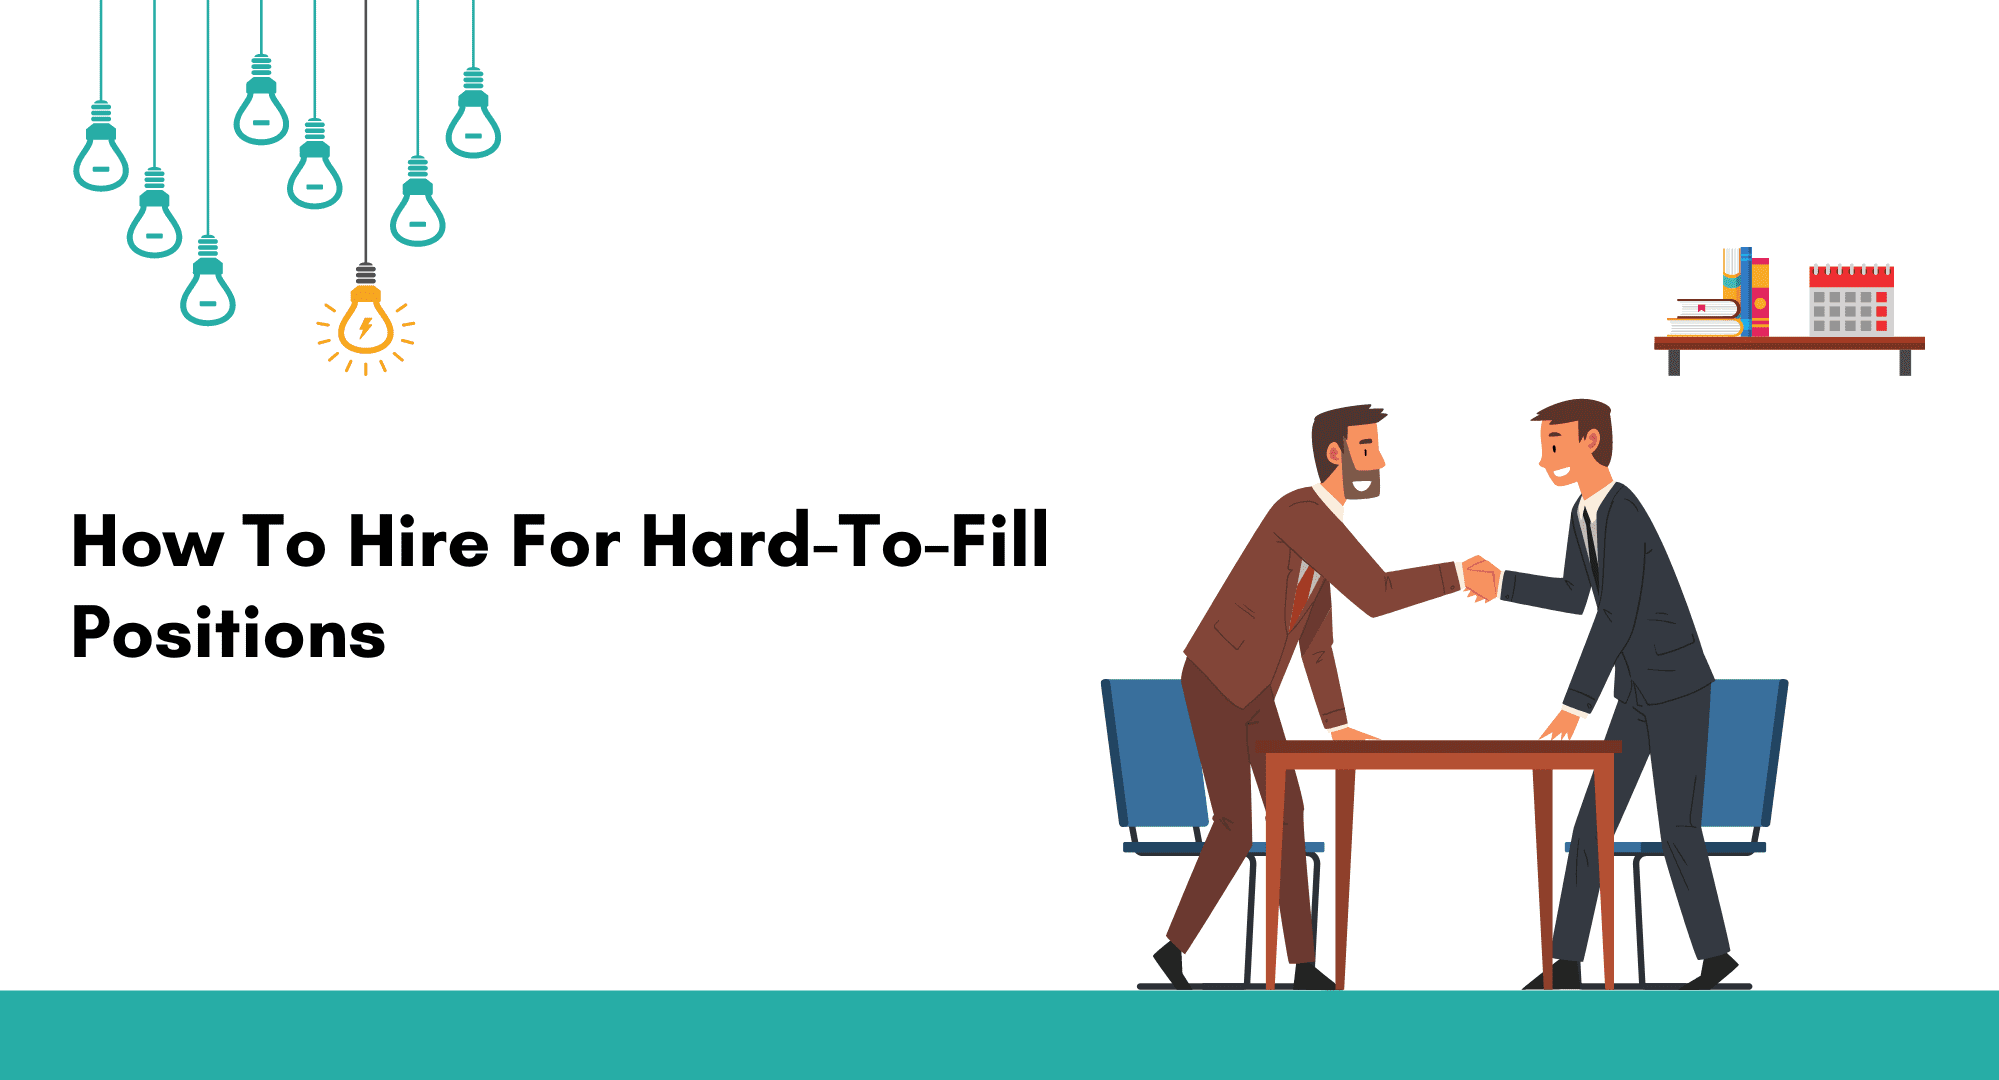 how to hire for hard-to-fill positions. Recruiting Tips for Hard-to-Fill Positions. 10 Recruiting Tips for Hard-to-Fill Positions. RECRUITING TIPS FOR HARD-TO-FILL ROLES AND COMPETITIVE MARKETS. Ways to Attract Candidates to Your Hard-to-Fill Roles.